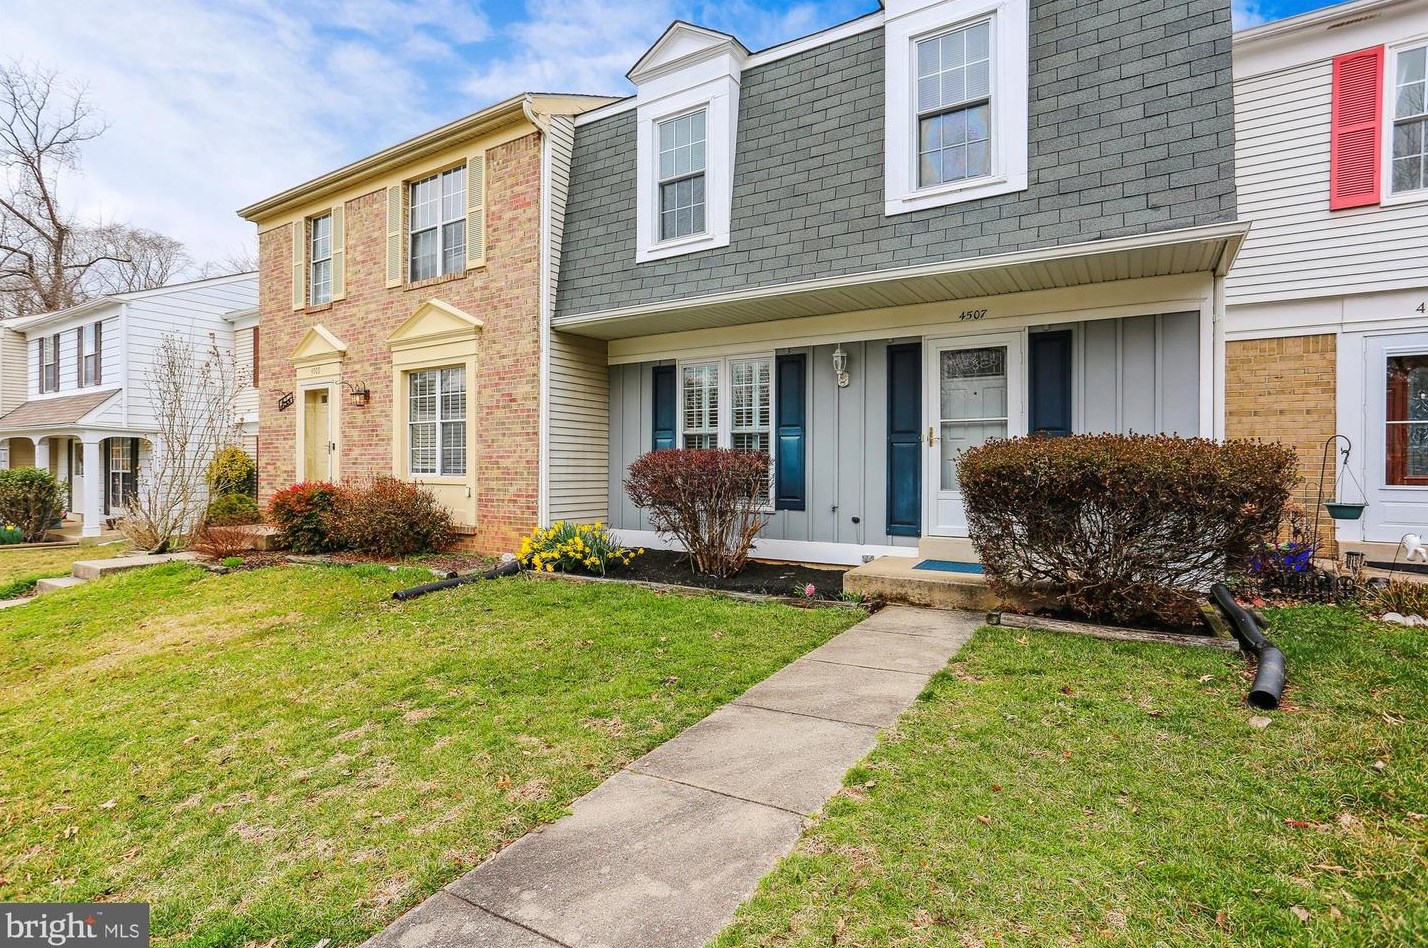 4507 Cannes Ln, Olney, MD 20832-2056